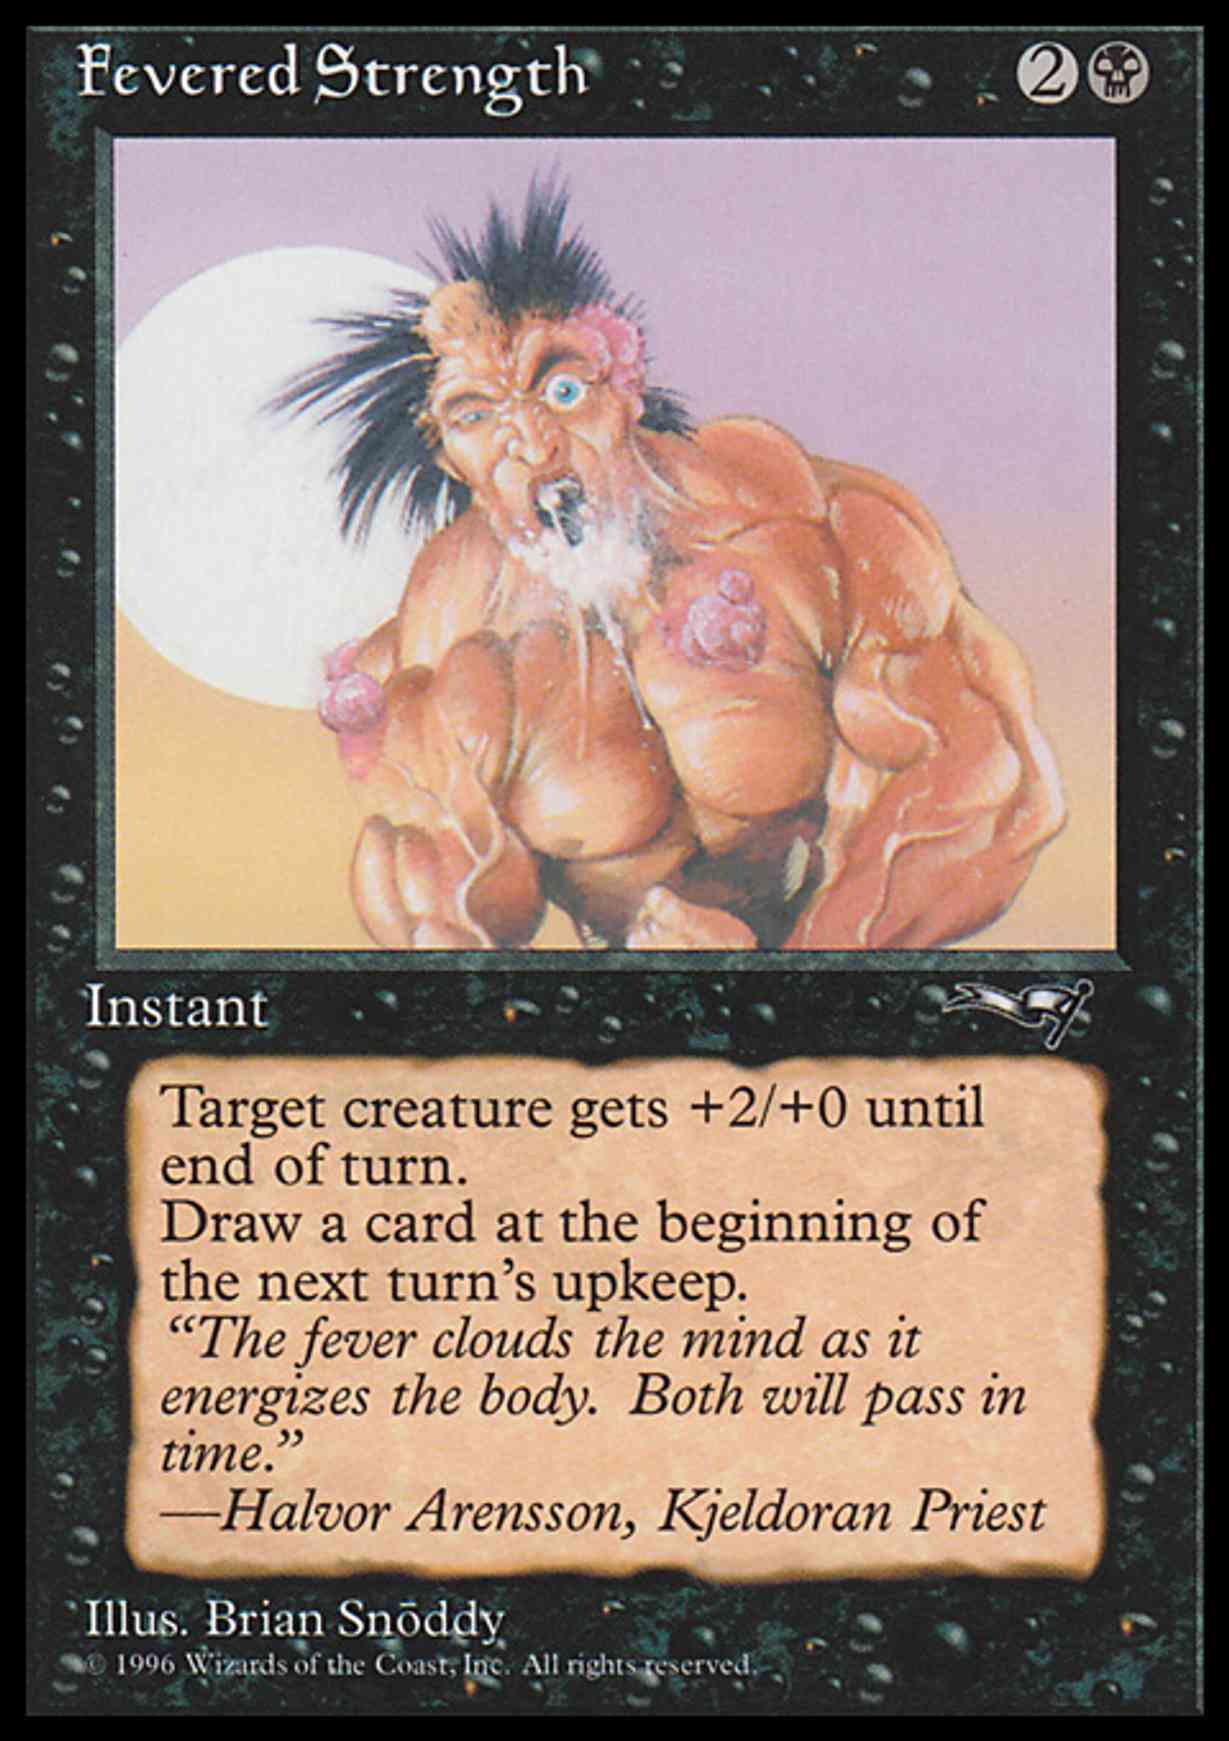 Fevered Strength (Foaming at Mouth) magic card front